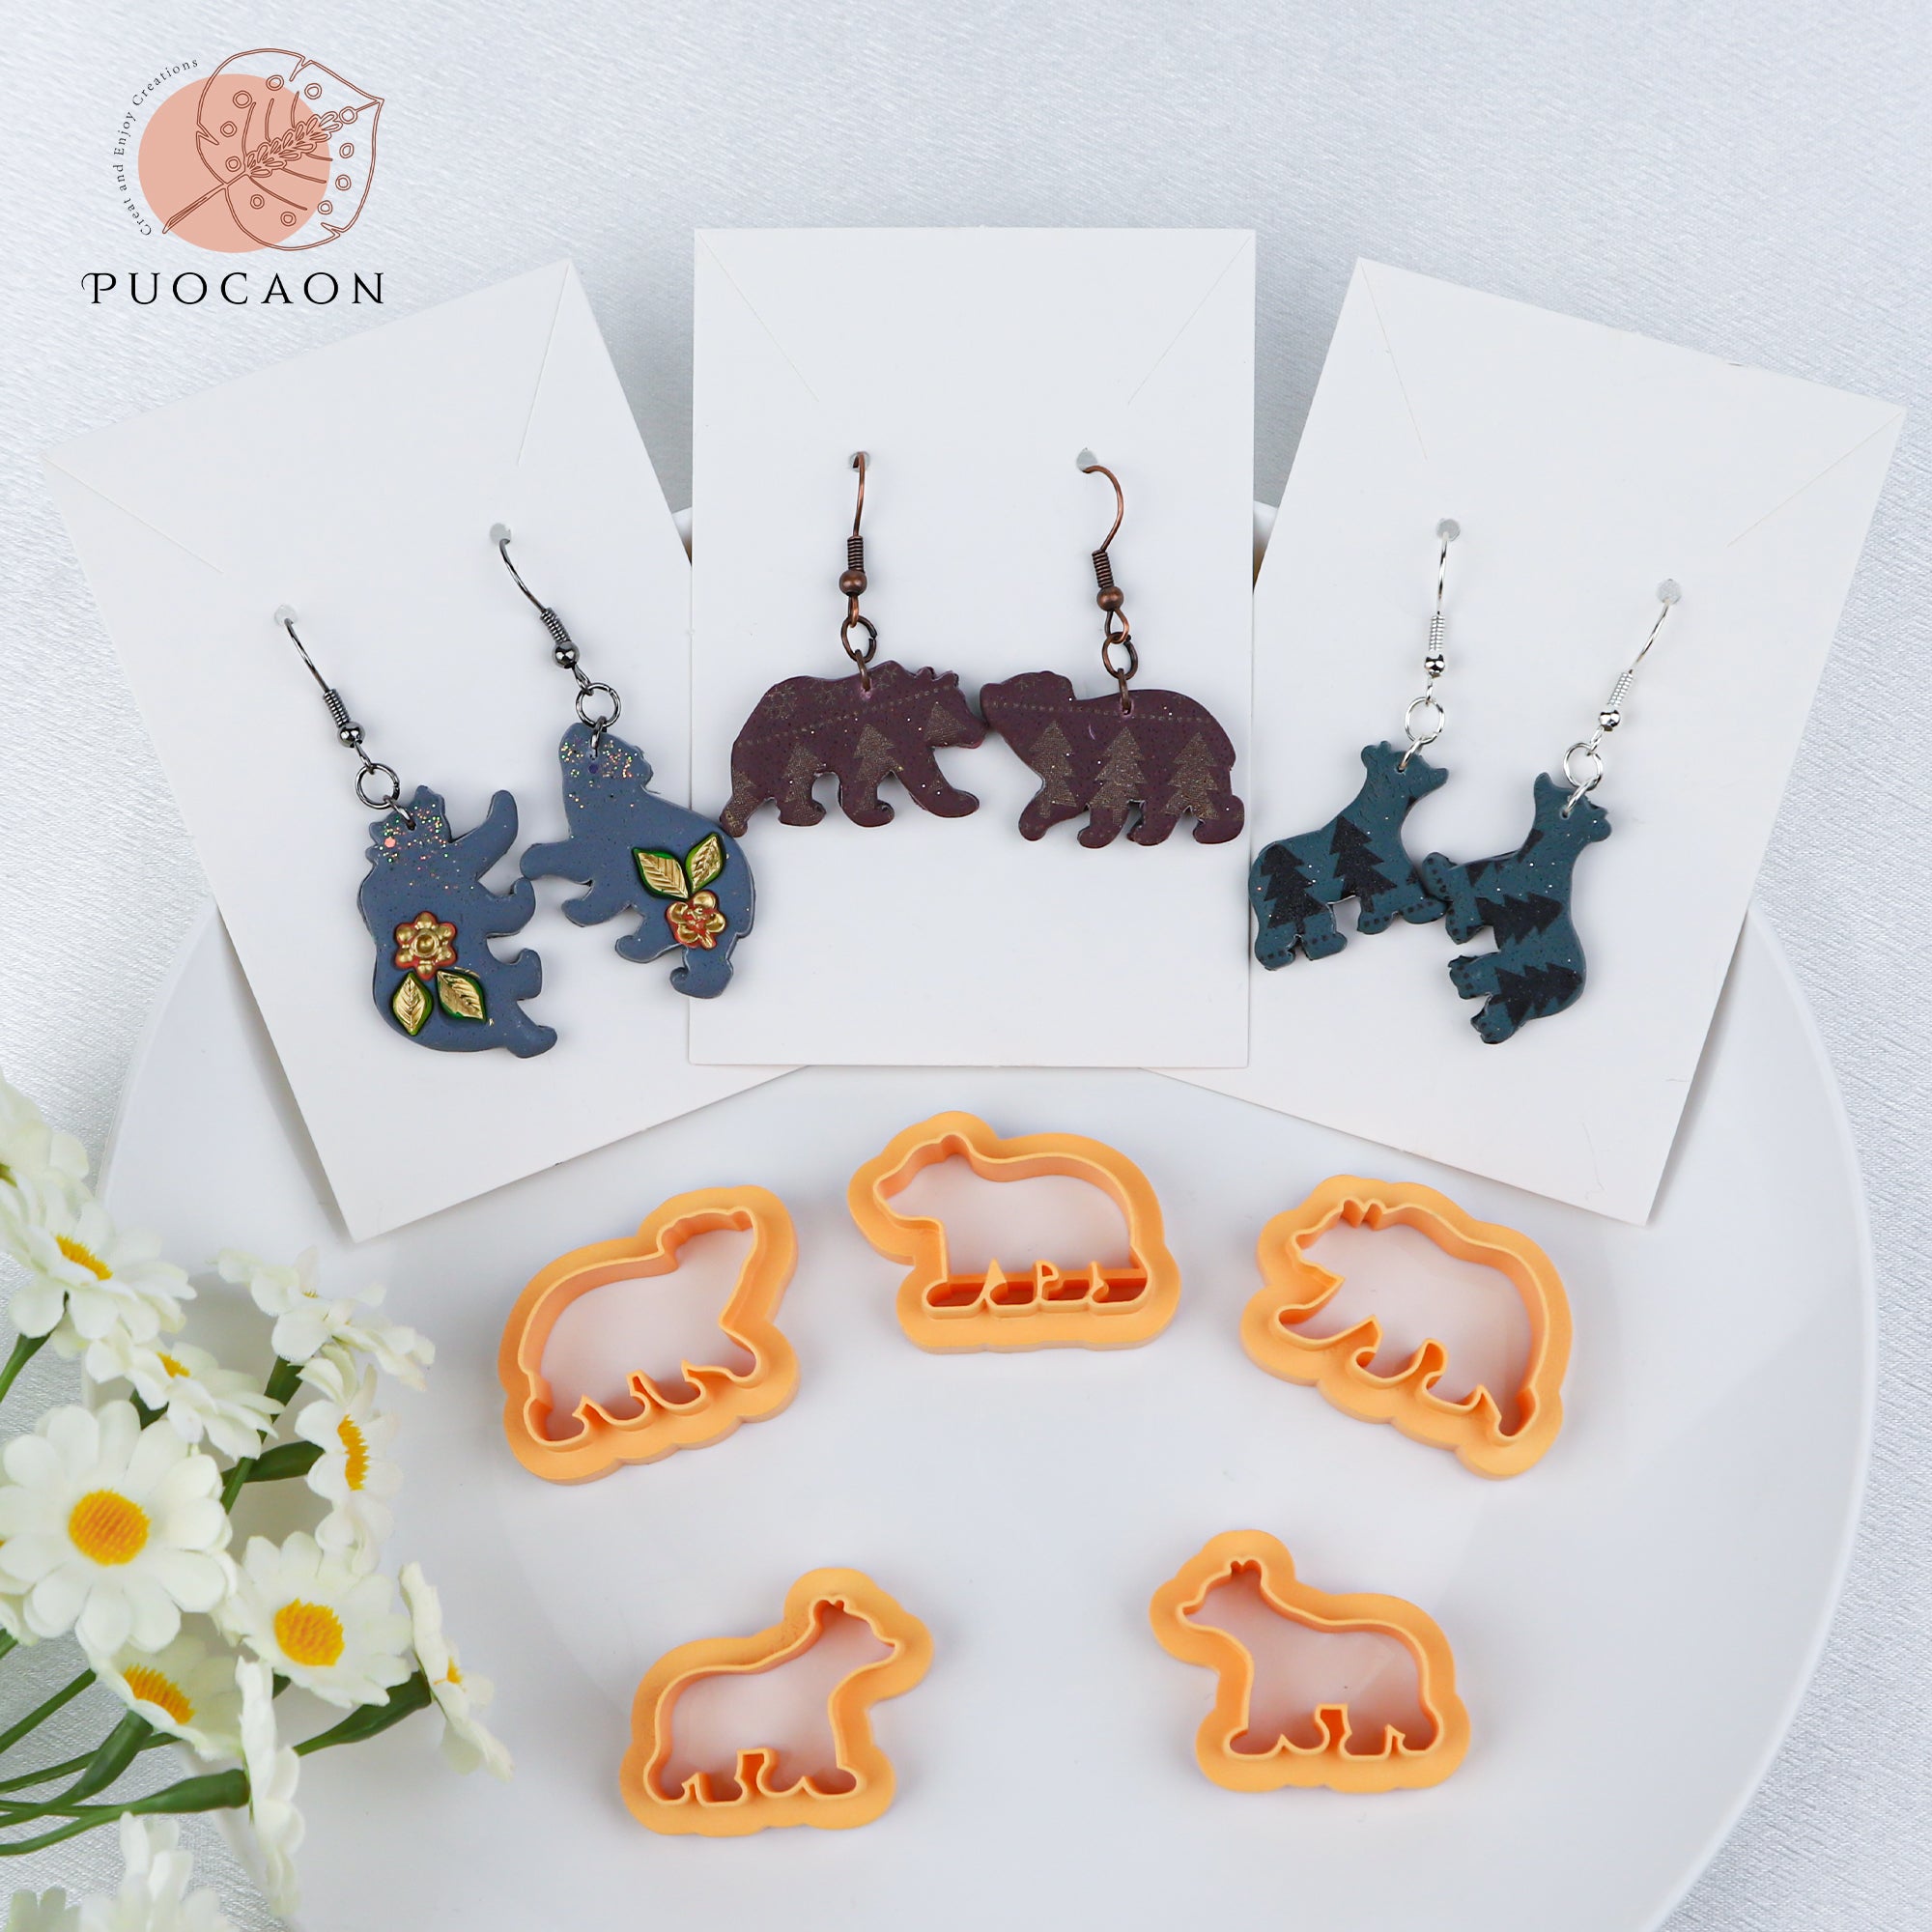 Puocaon Bear Polymer Clay Cutters 6 Pcs